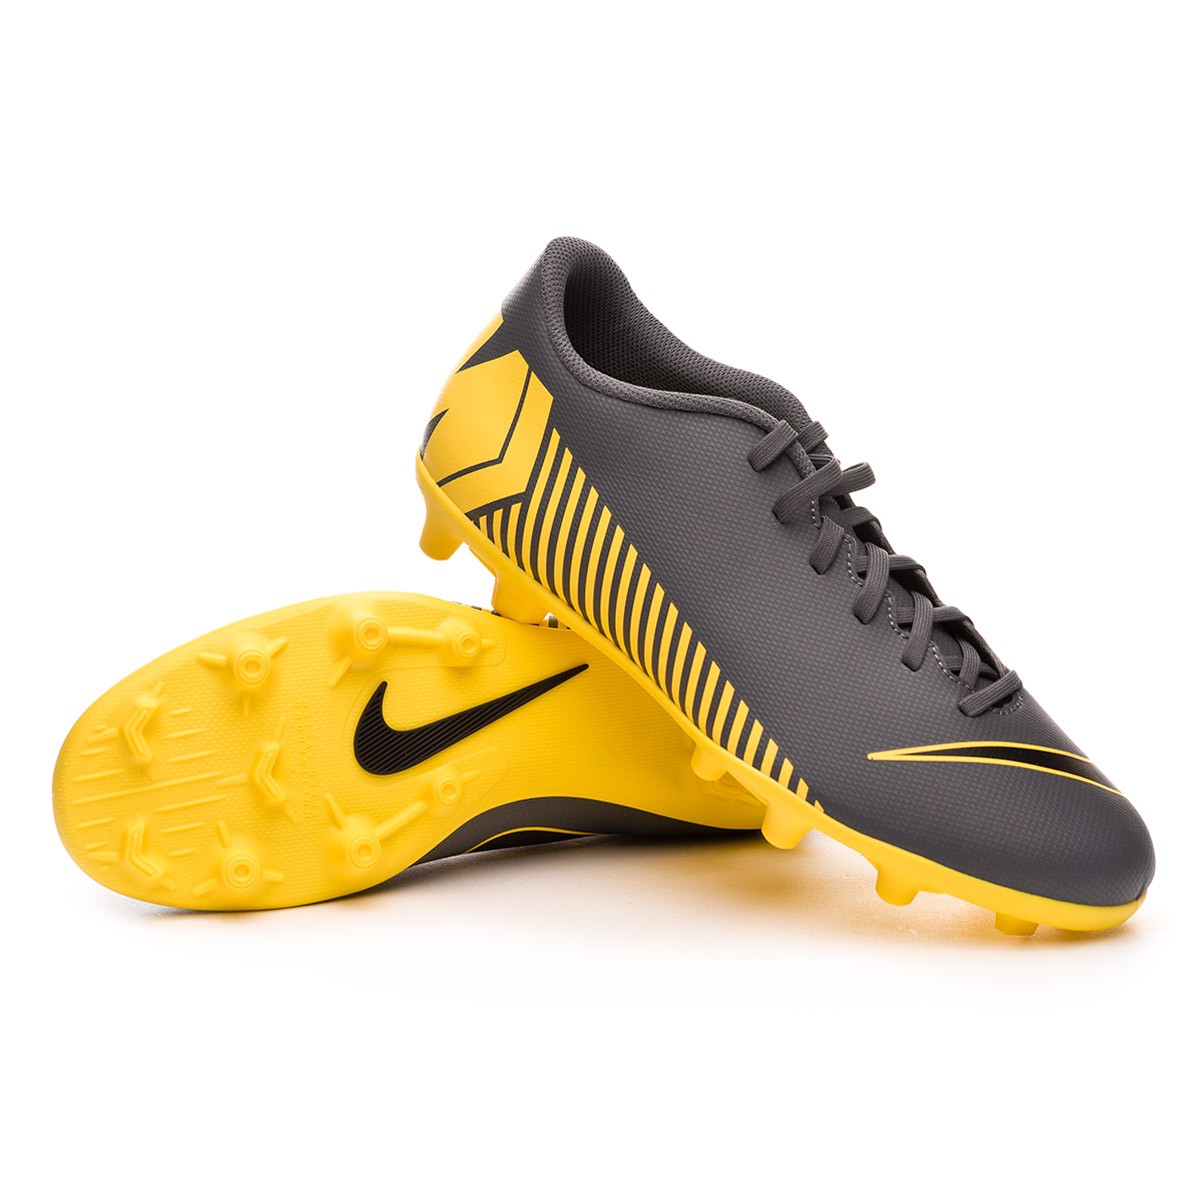 grey and yellow nike boots